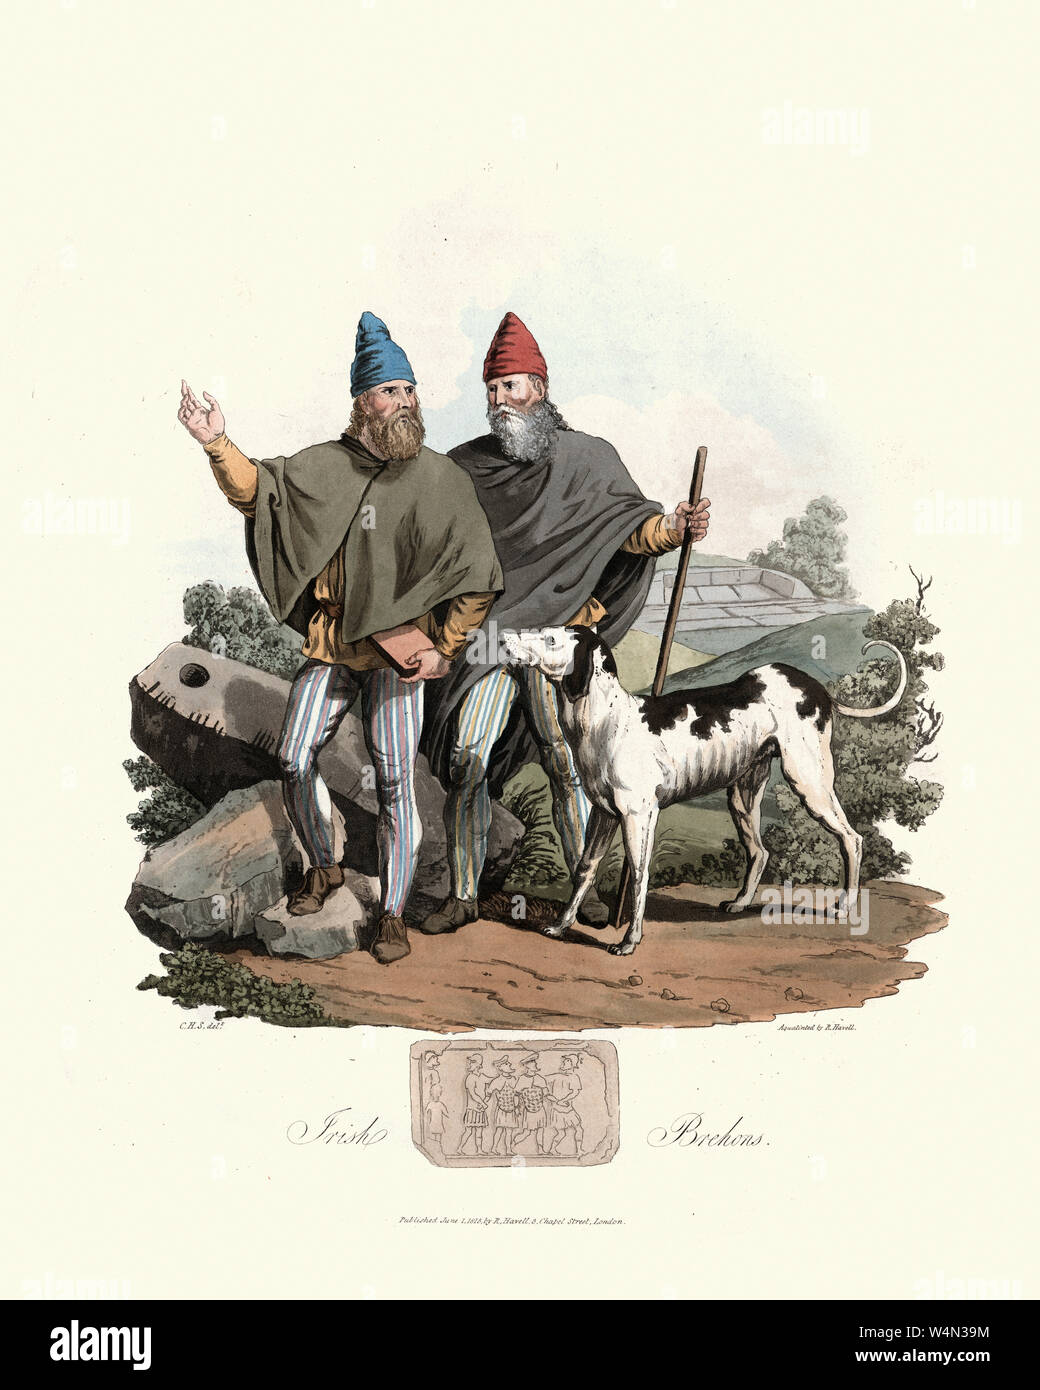 Vintage engraving of Costumes of Ancient Irish Brehons. Brehon is a term for a historical arbitration, mediative and judicial role in Gaelic culture. Stock Photo